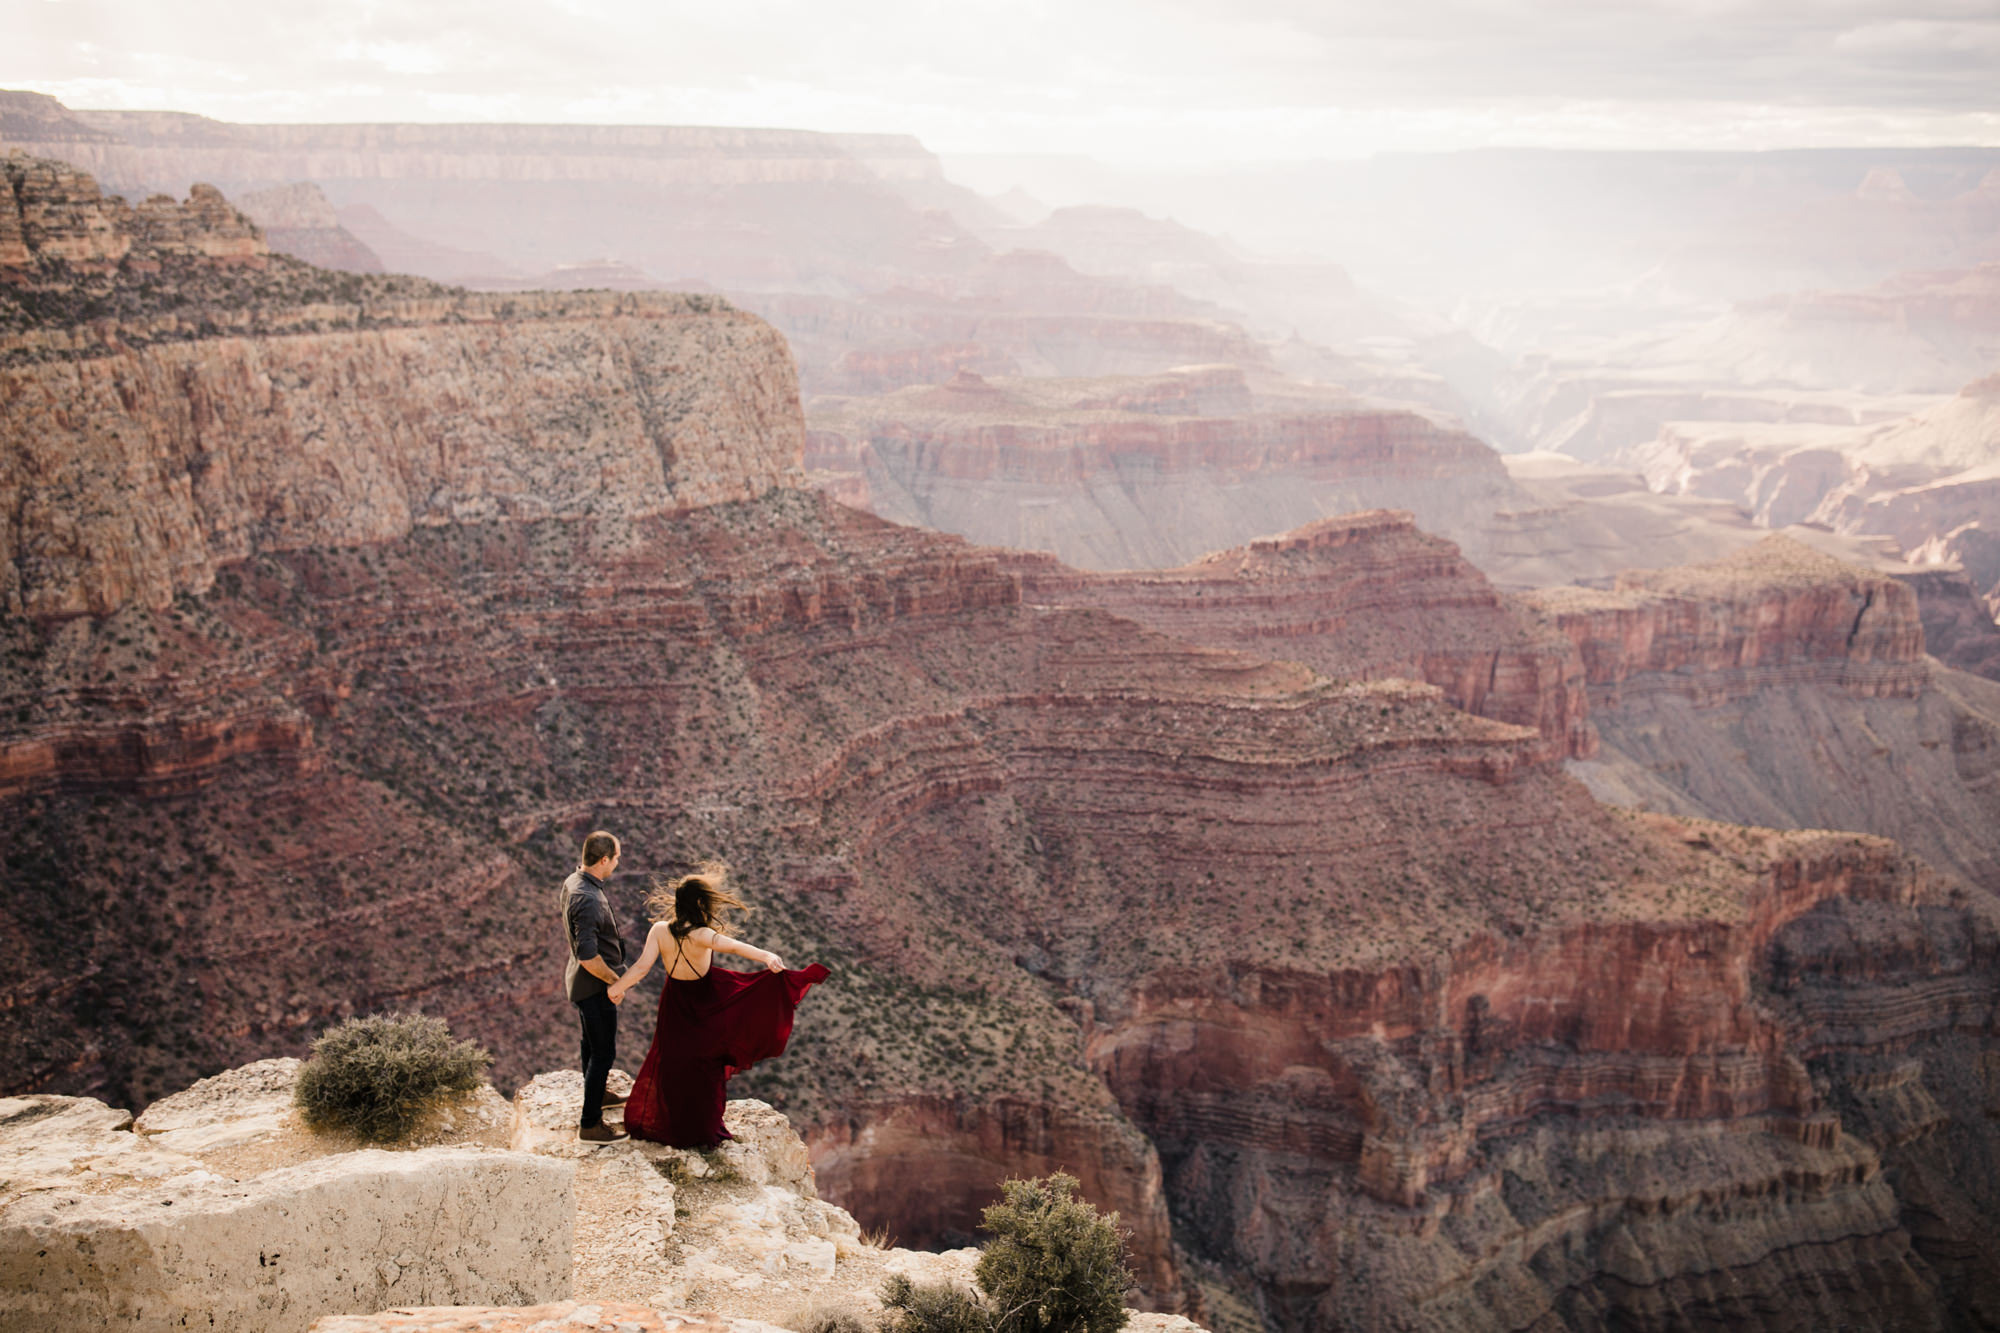 alex + stephen's grand canyon national park engagement session | desert elopement inspiration | weddings in national parks | the hearnes adventure photography | www.thehearnes.com